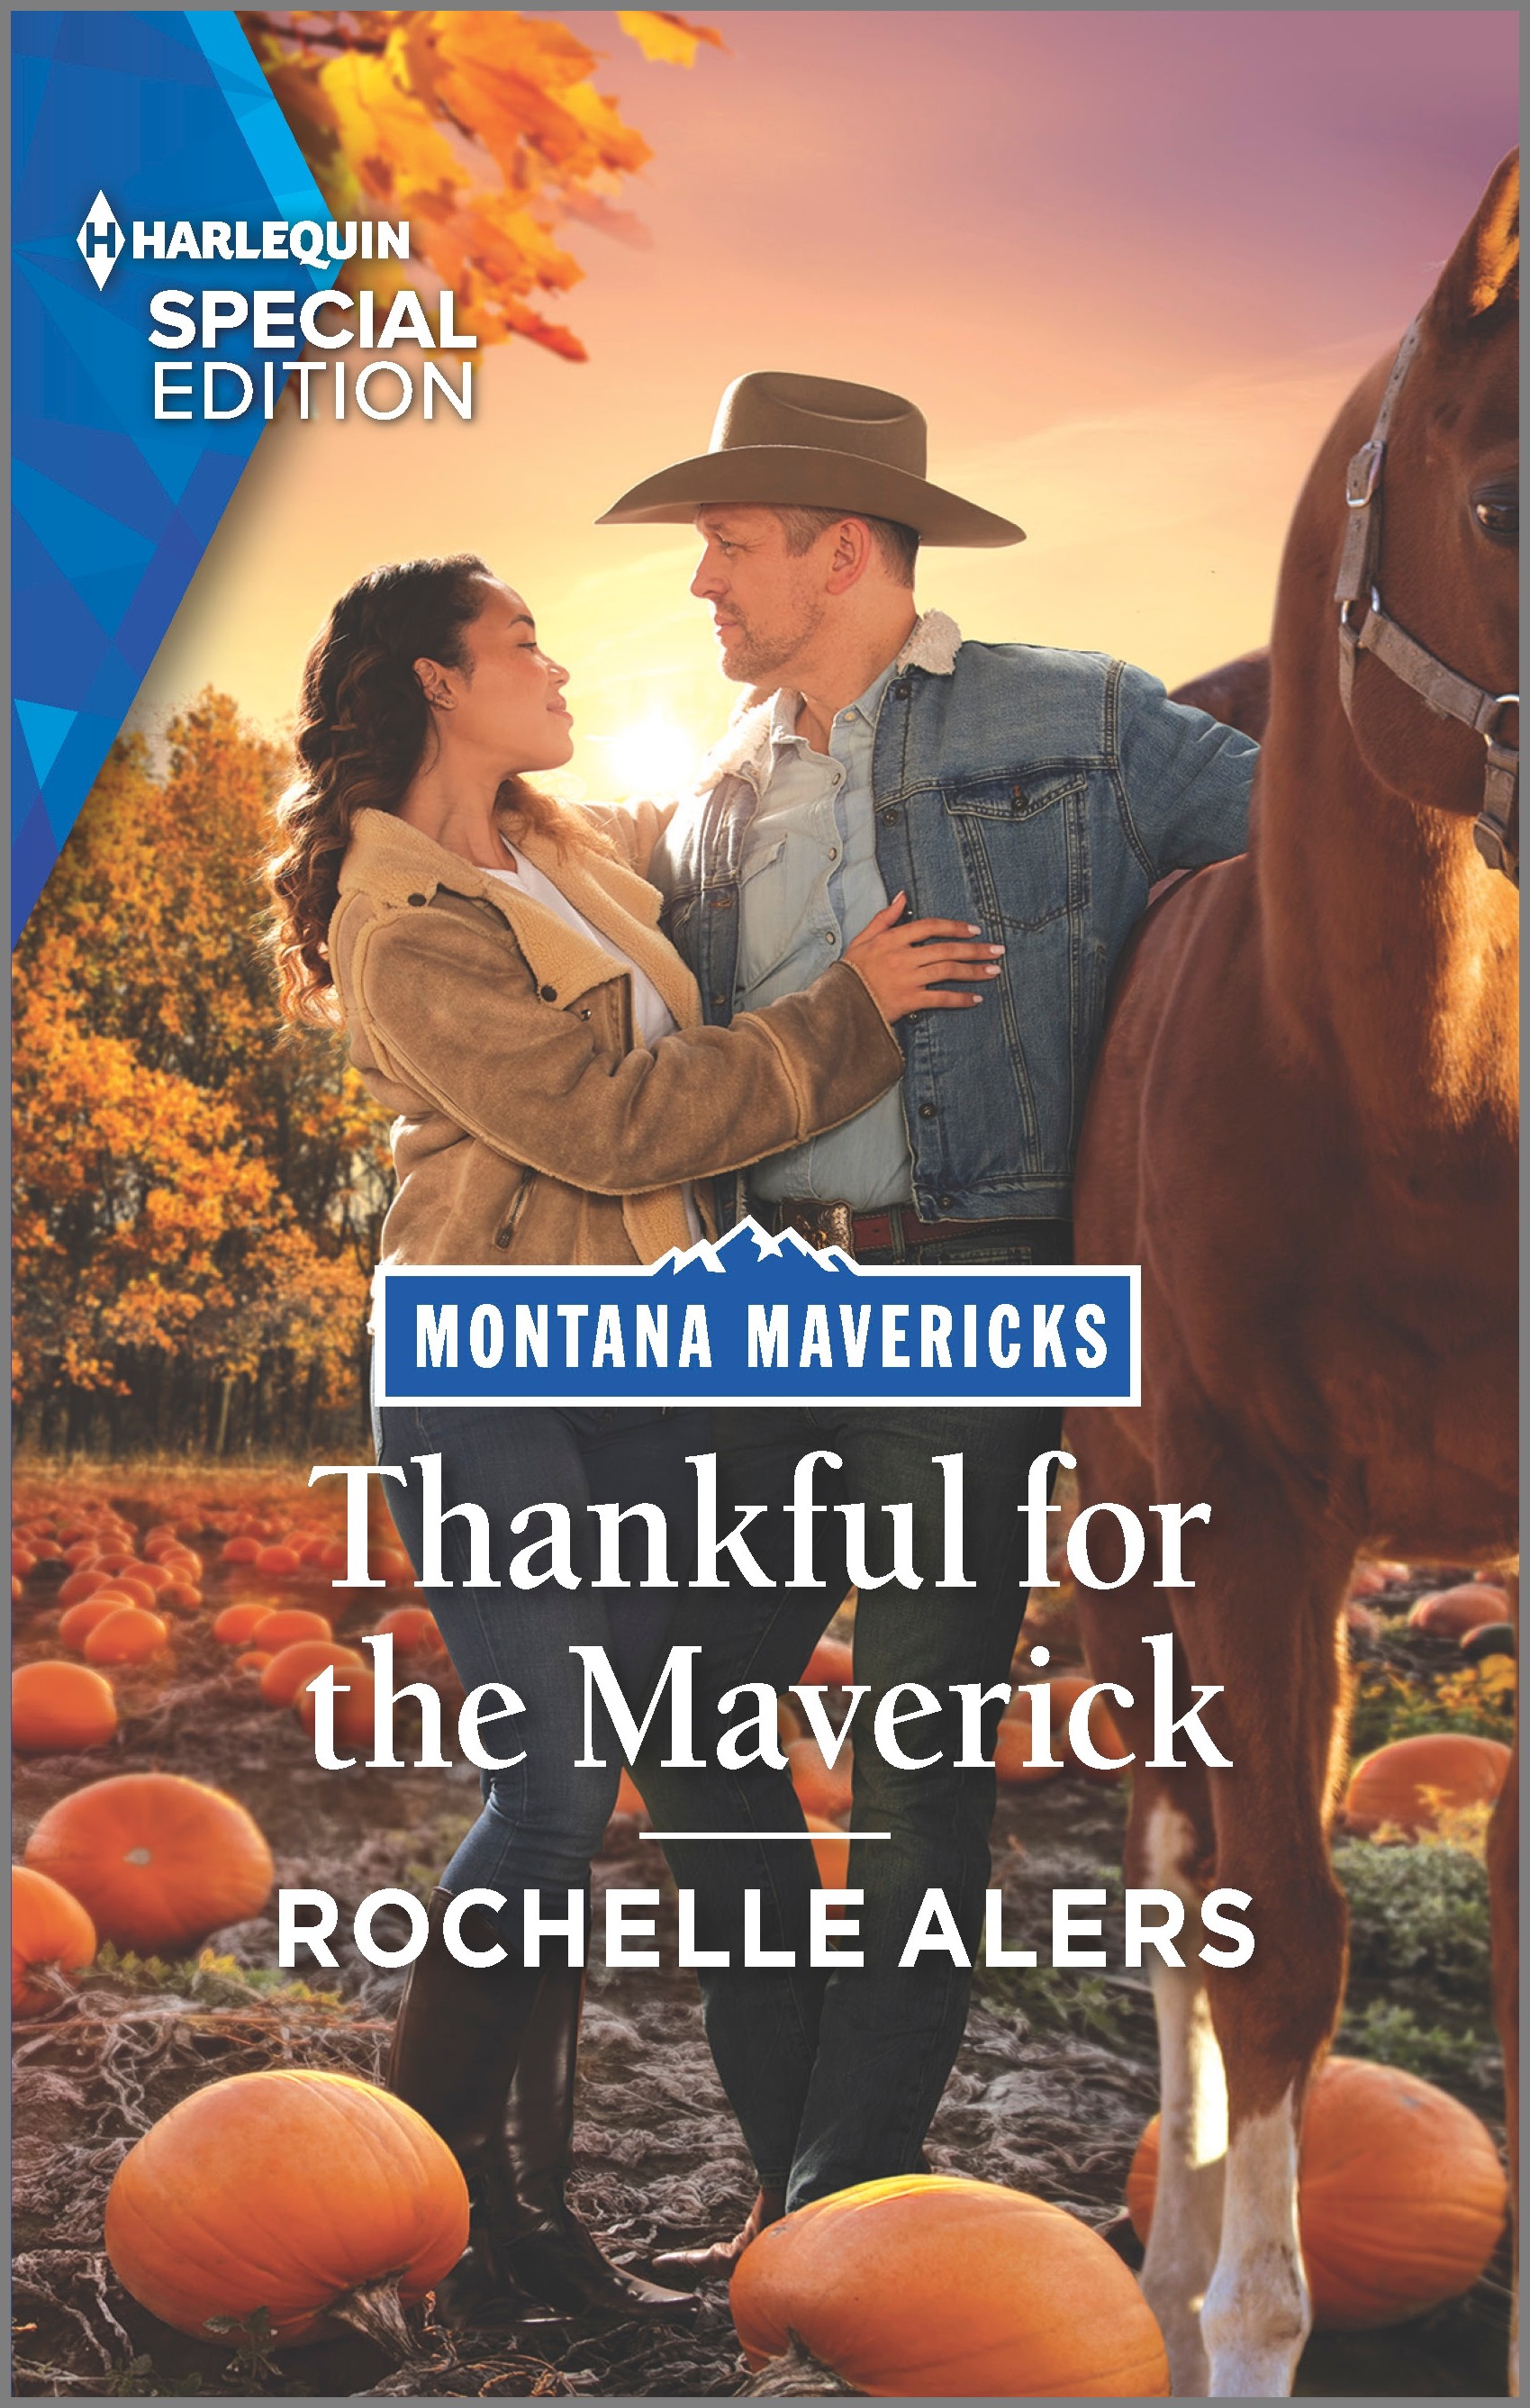 THANKFUL FOR THE MAVERICK by Rochelle Alers